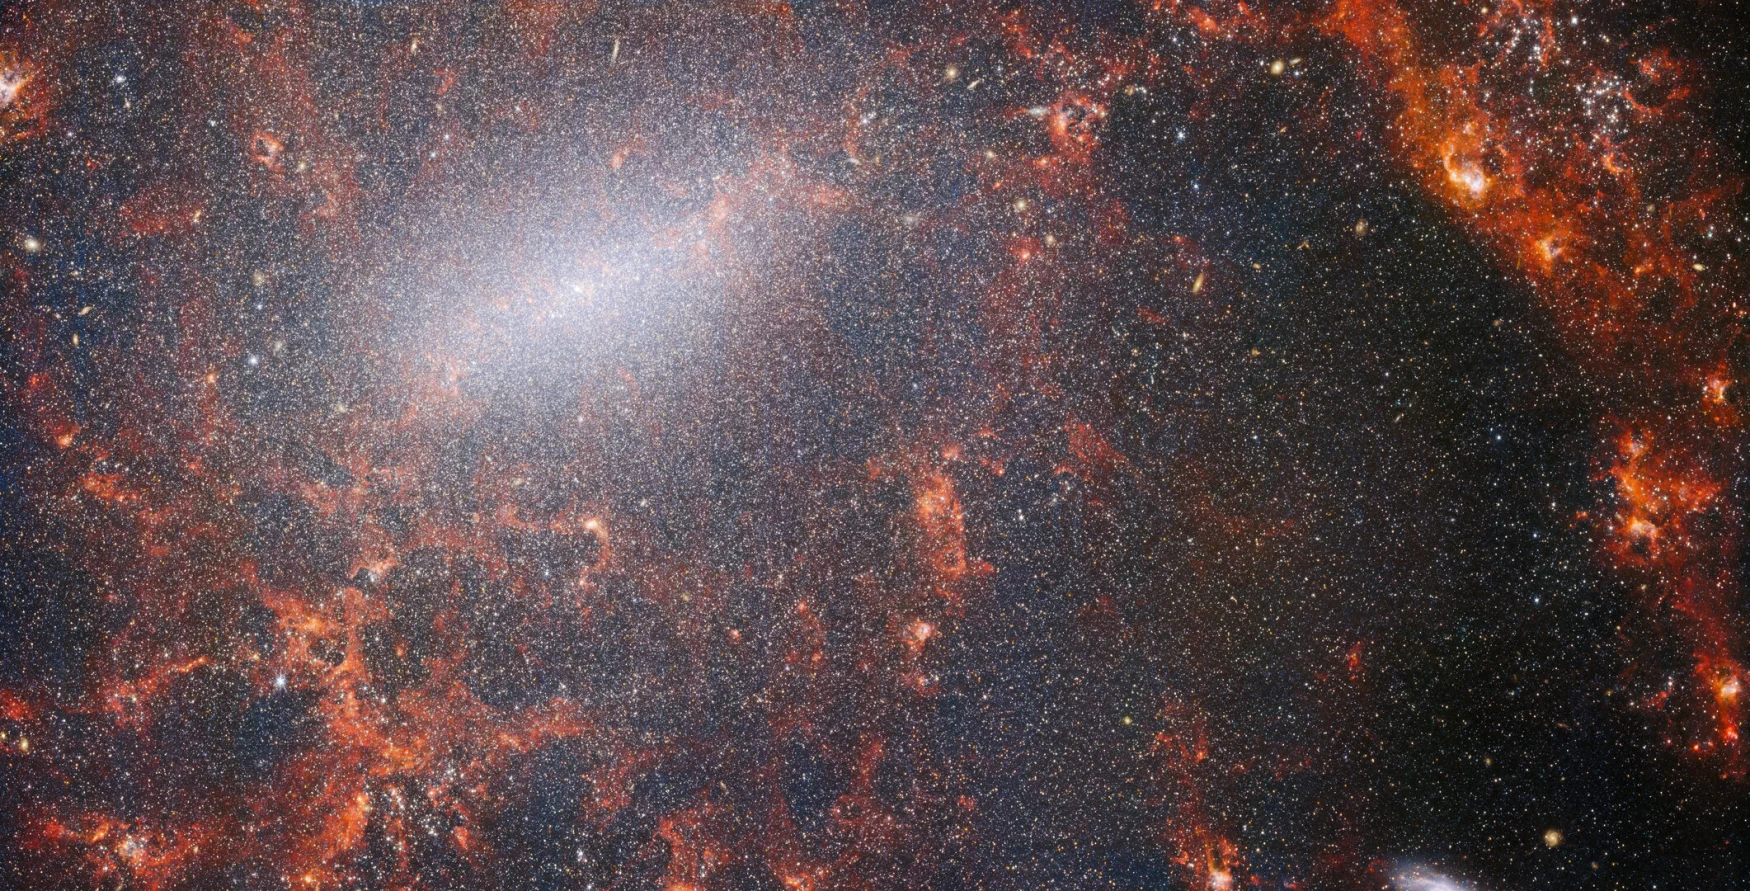 A delicate tracery of dust and bright star clusters threads across this image from the NASA/ESA/CSA James Webb Space Telescope. This view from Webbâ€™s NIRCam instrument is studded by the galaxyâ€™s massive population of stars, most dense along its bright central bar, along with burning red clouds of gas illuminated by young stars within. These glittering stars belong to the barred spiral galaxy NGC 5068, located around 17 million light-years from Earth in the constellation Virgo. This portrait of NGC 5068 is part of a campaign to create an astronomical treasure trove, a repository of observations of star formation in nearby galaxies. Previous gems from this collection can be seen here and here. These observations are particularly valuable to astronomers for two reasons. The first is because star formation underpins so many fields in astronomy, from the physics of the tenuous plasma that lies between stars to the evolution of entire galaxies. By observing the formation of stars in nearby galaxies, astronomers hope to kick-start major scientific advances with some of the first available data from Webb. The second reason is that Webbâ€™s observations build on other studies using telescopes including the NASA/ESA Hubble Space Telescope and some of the worldâ€™s most capable ground-based observatories. Webb collected images of 19 nearby star-forming galaxies which astronomers could then combine with catalogues from Hubble of 10 000 star clusters, spectroscopic mapping of 20Â 000 star-forming emission nebulae from the Very Large Telescope (VLT), and observations of 12Â 000 dark, dense molecular clouds identified by the Atacama Large Millimeter/submillimeter Array (ALMA). These observations span the electromagnetic spectrum and give astronomers an unprecedented opportunity to piece together the minutiae of star formation. This near-infrared image of the galaxy is filled by the enormous gathering of older stars which make up the core of NGC 5068. The keen vision of NIRCam allows astronomers to peer through the galaxyâ€™s gas and dust to closely examine its stars. Dense and bright clouds of dust lie along the path of the spiral arms: these are H II regions, collections of hydrogen gas where new stars are forming. The young, energetic stars ionise the hydrogen around them which, when combined with hot dust emission, creates this reddish glow. H II regions form a fascinating target for astronomers, and Webbâ€™s instruments are the perfect tools to examine them, resulting in this image. [Image Description: A close-in image of a spiral galaxy, showing its core and part of a spiral arm. At this distance thousands upon thousands of tiny stars that make up the galaxy can be seen. The stars are most dense in a whitish bar that forms the core, and less dense out from that towards the arm. Bright red gas clouds follow the twist of the galaxy and the spiral arm.] Links NGC 5068 (NIRCam+MIRI Image) NGC 5068 (MIRI Image) Slider Tool (MIRI and NIRCam images) Video: Pan of NGC 5068 Video: Webb's views of NGC 5068 (MIRI and NIRCam images) Video: Zoom into NGC 5068 